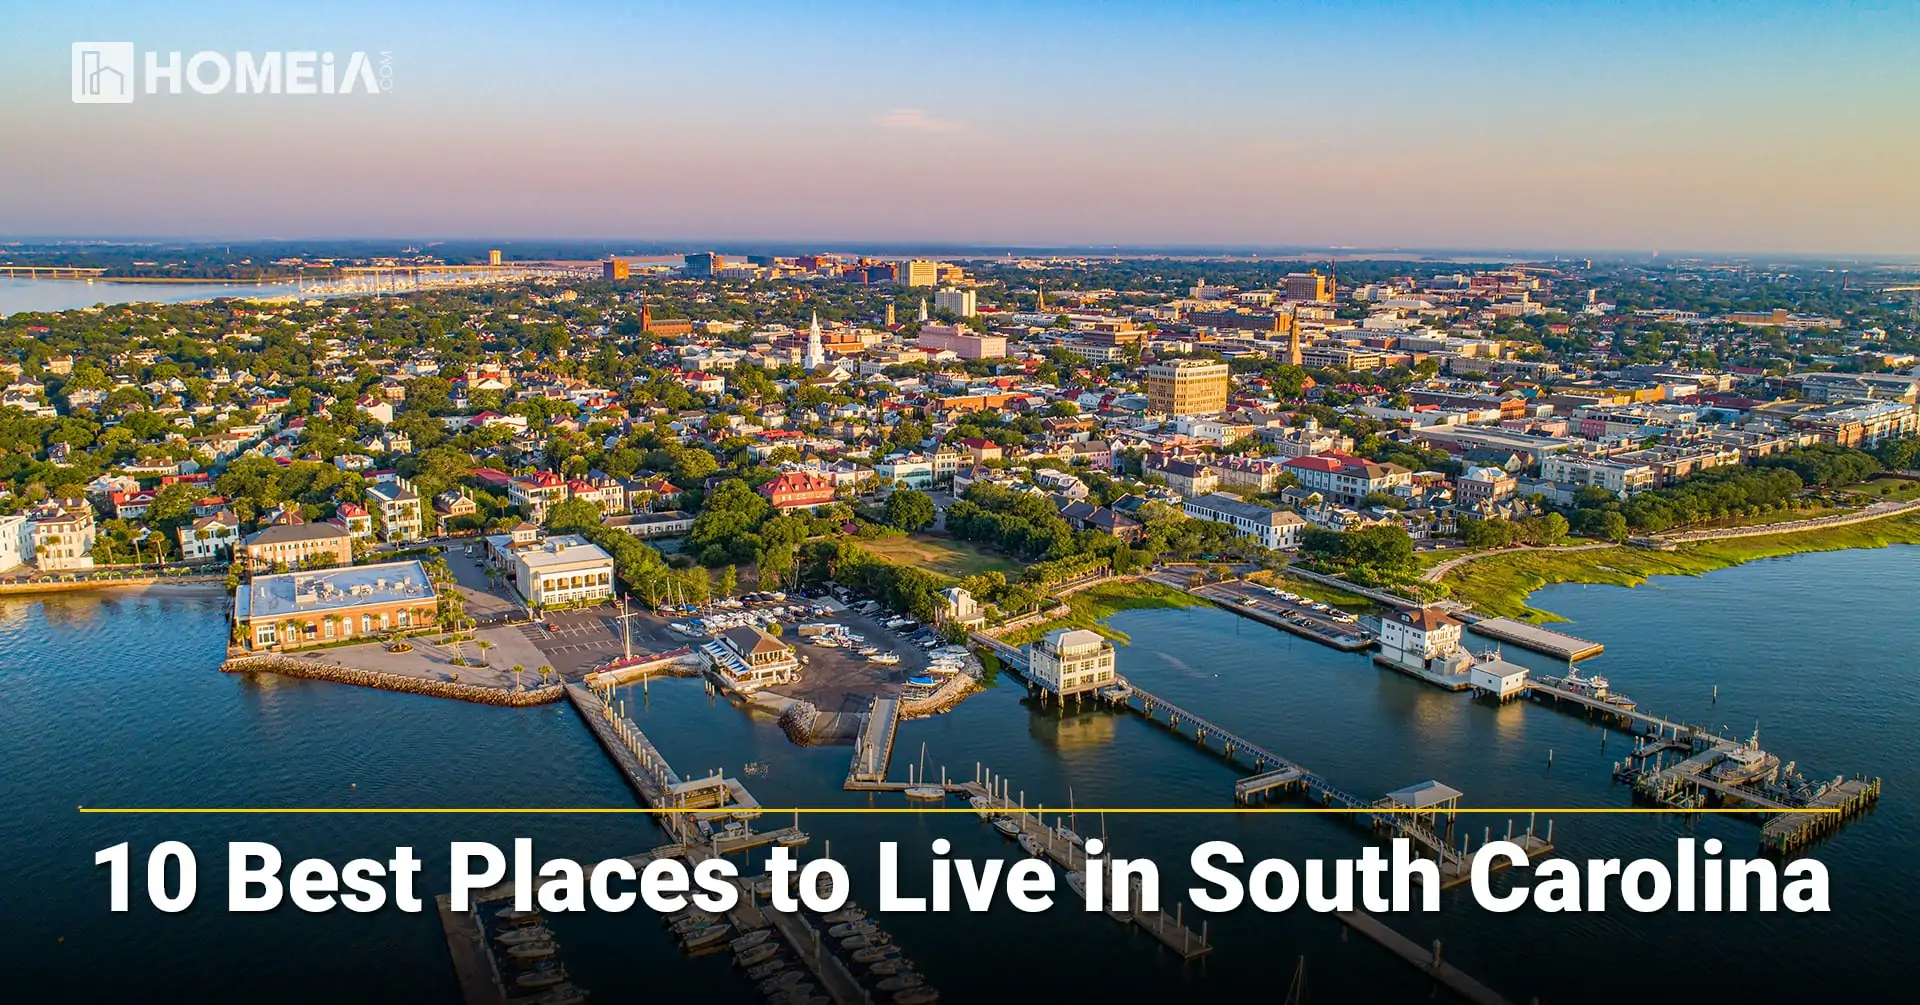 The 10 Best Places to Live in South Carolina for Families